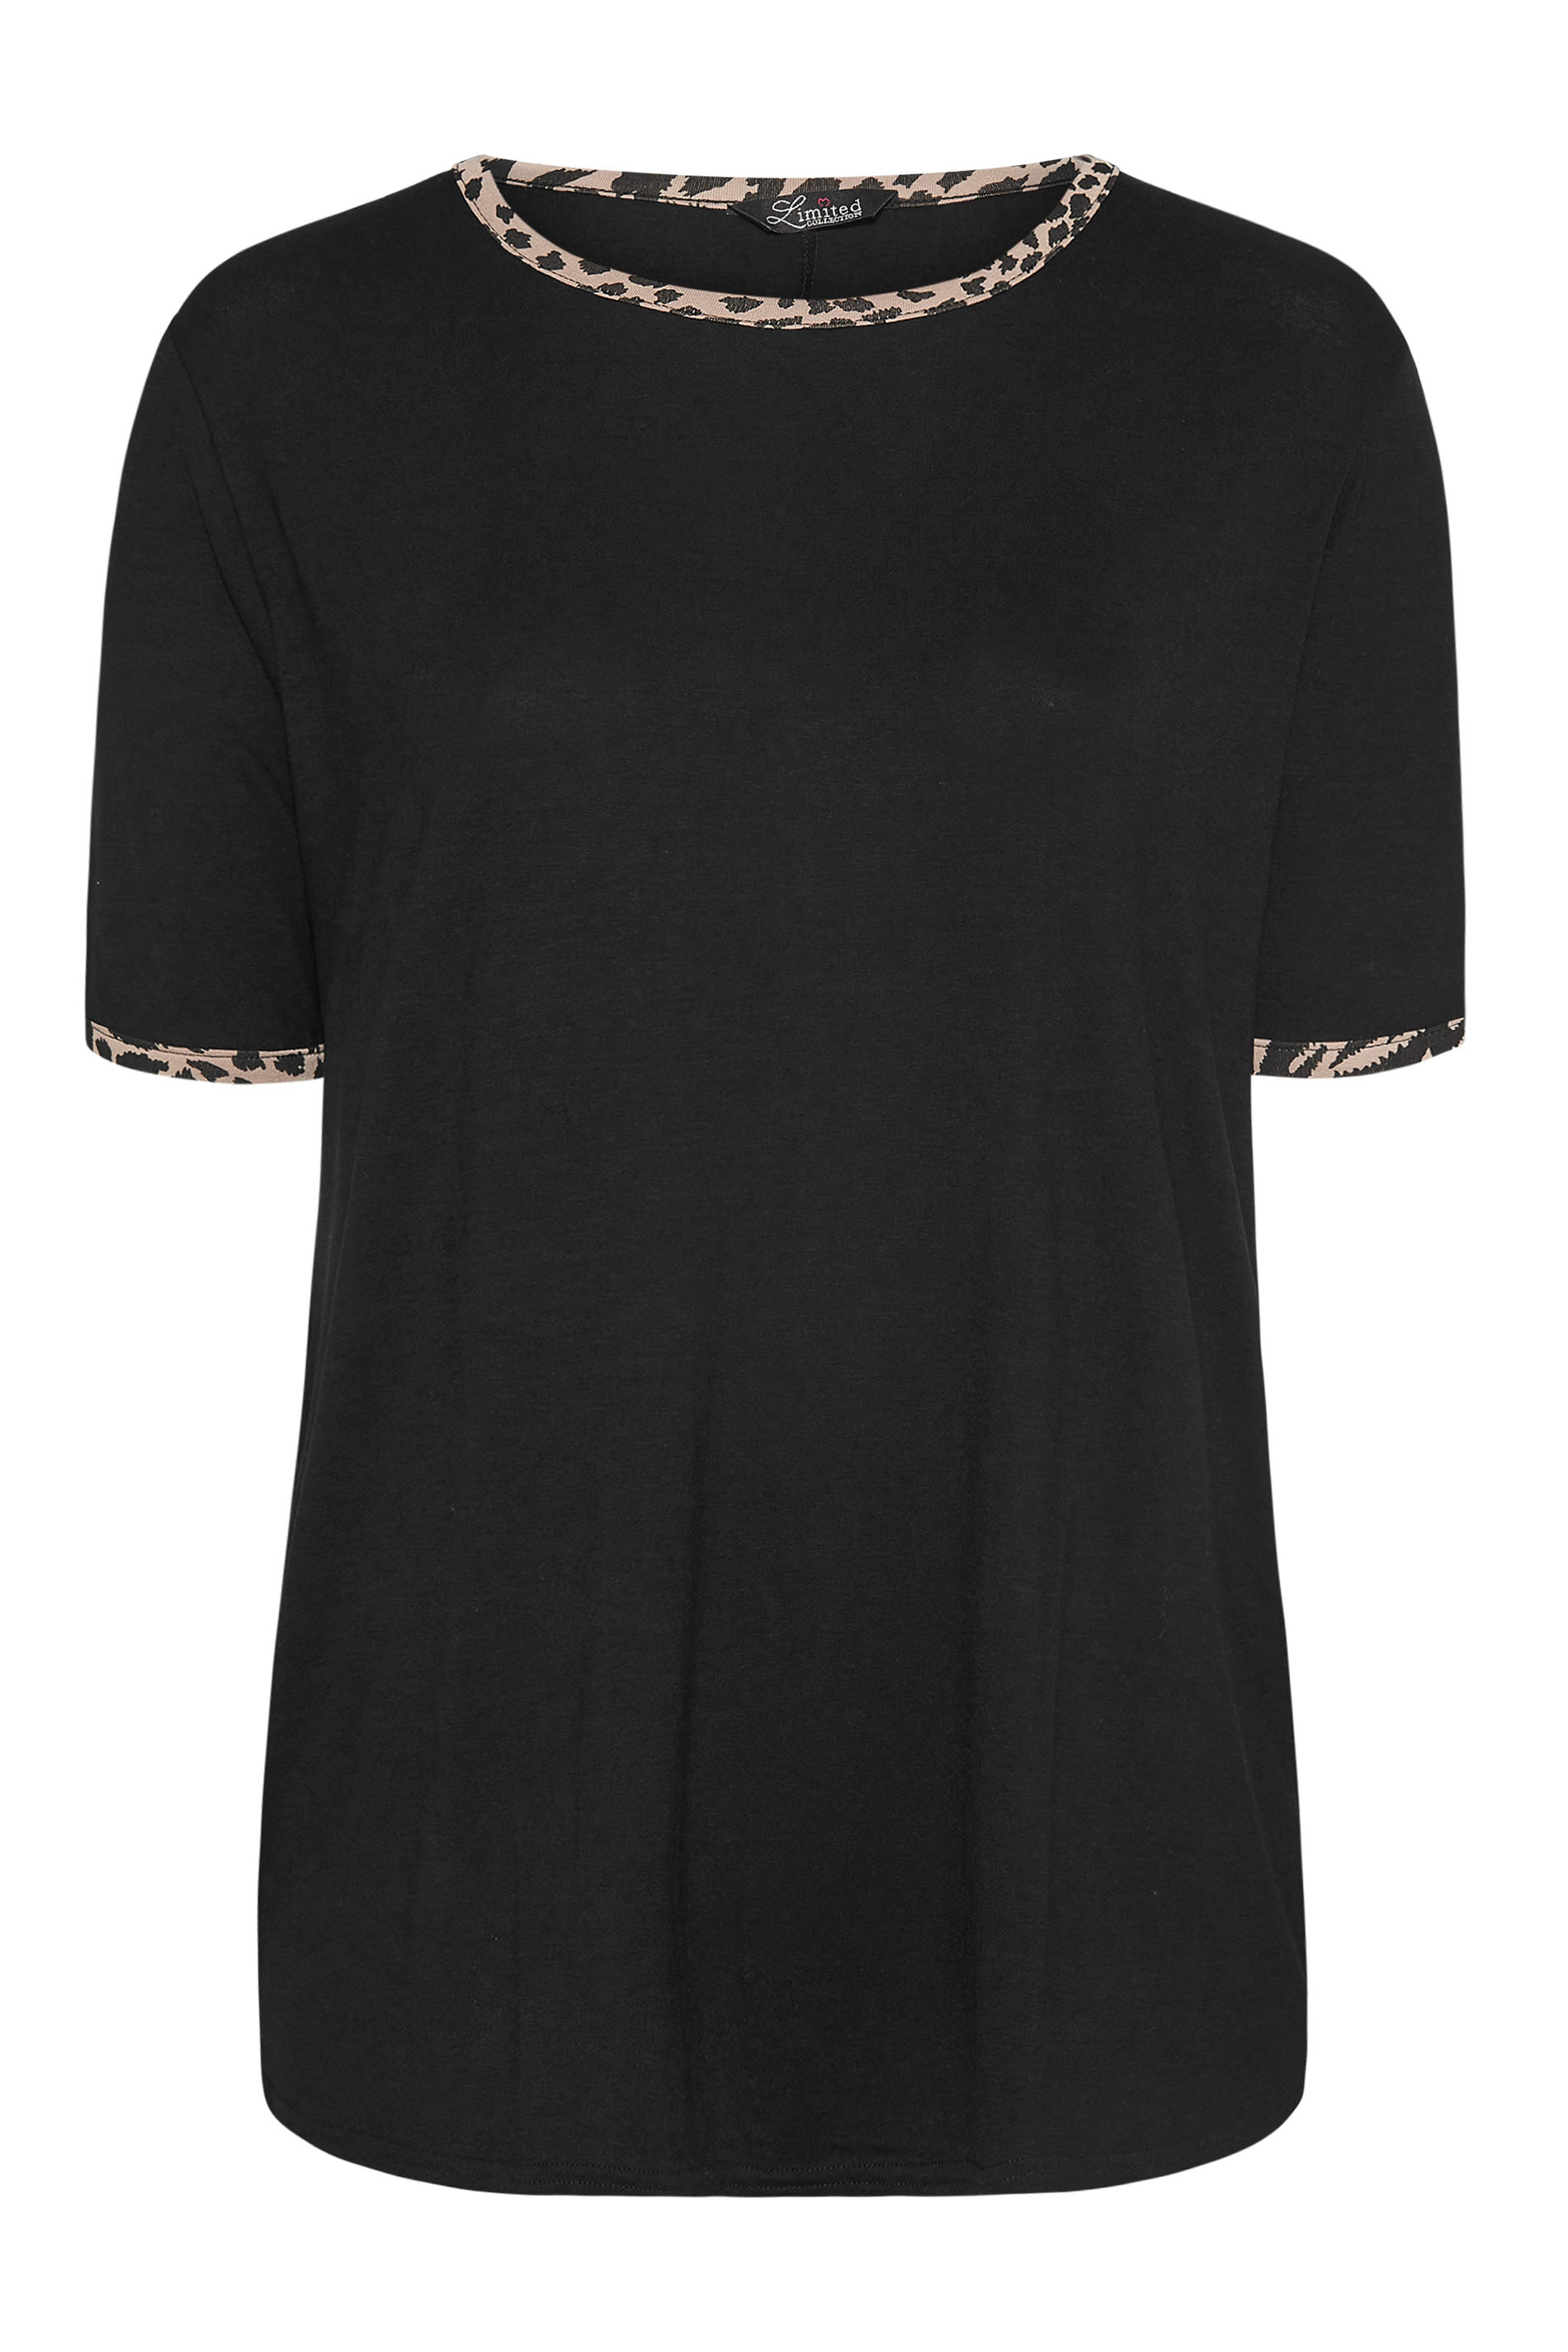 Grande taille  Tops Grande taille  Tops Jersey | LIMITED COLLECTION - T-Shirt Noir Bordure Léopard - XK20715